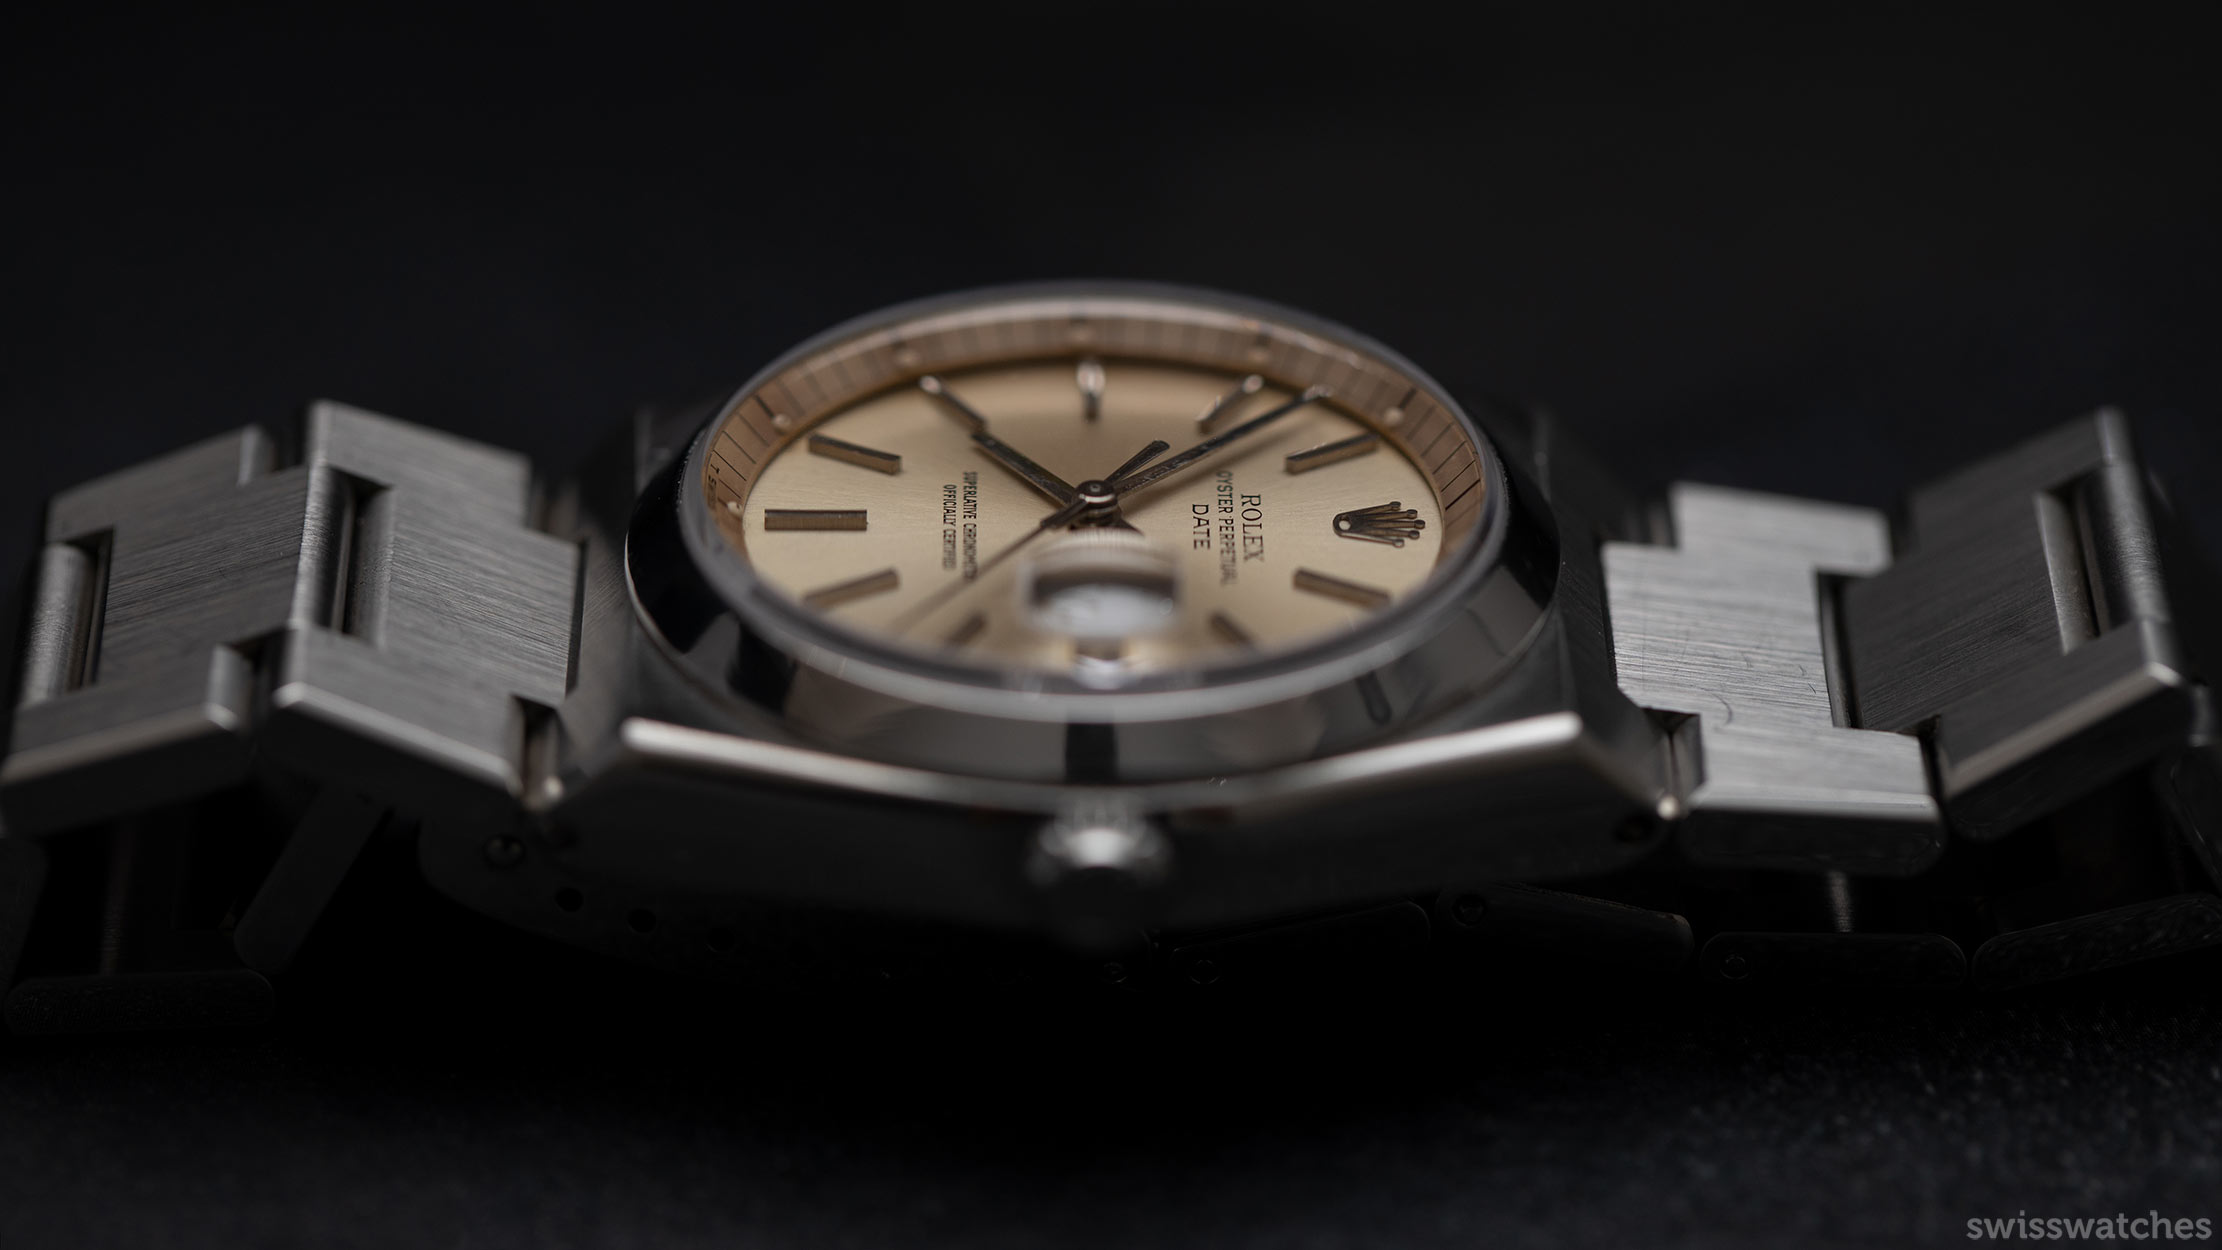 The Curious Tale Of The ROLEX 1530: An Automatic Movement In A 